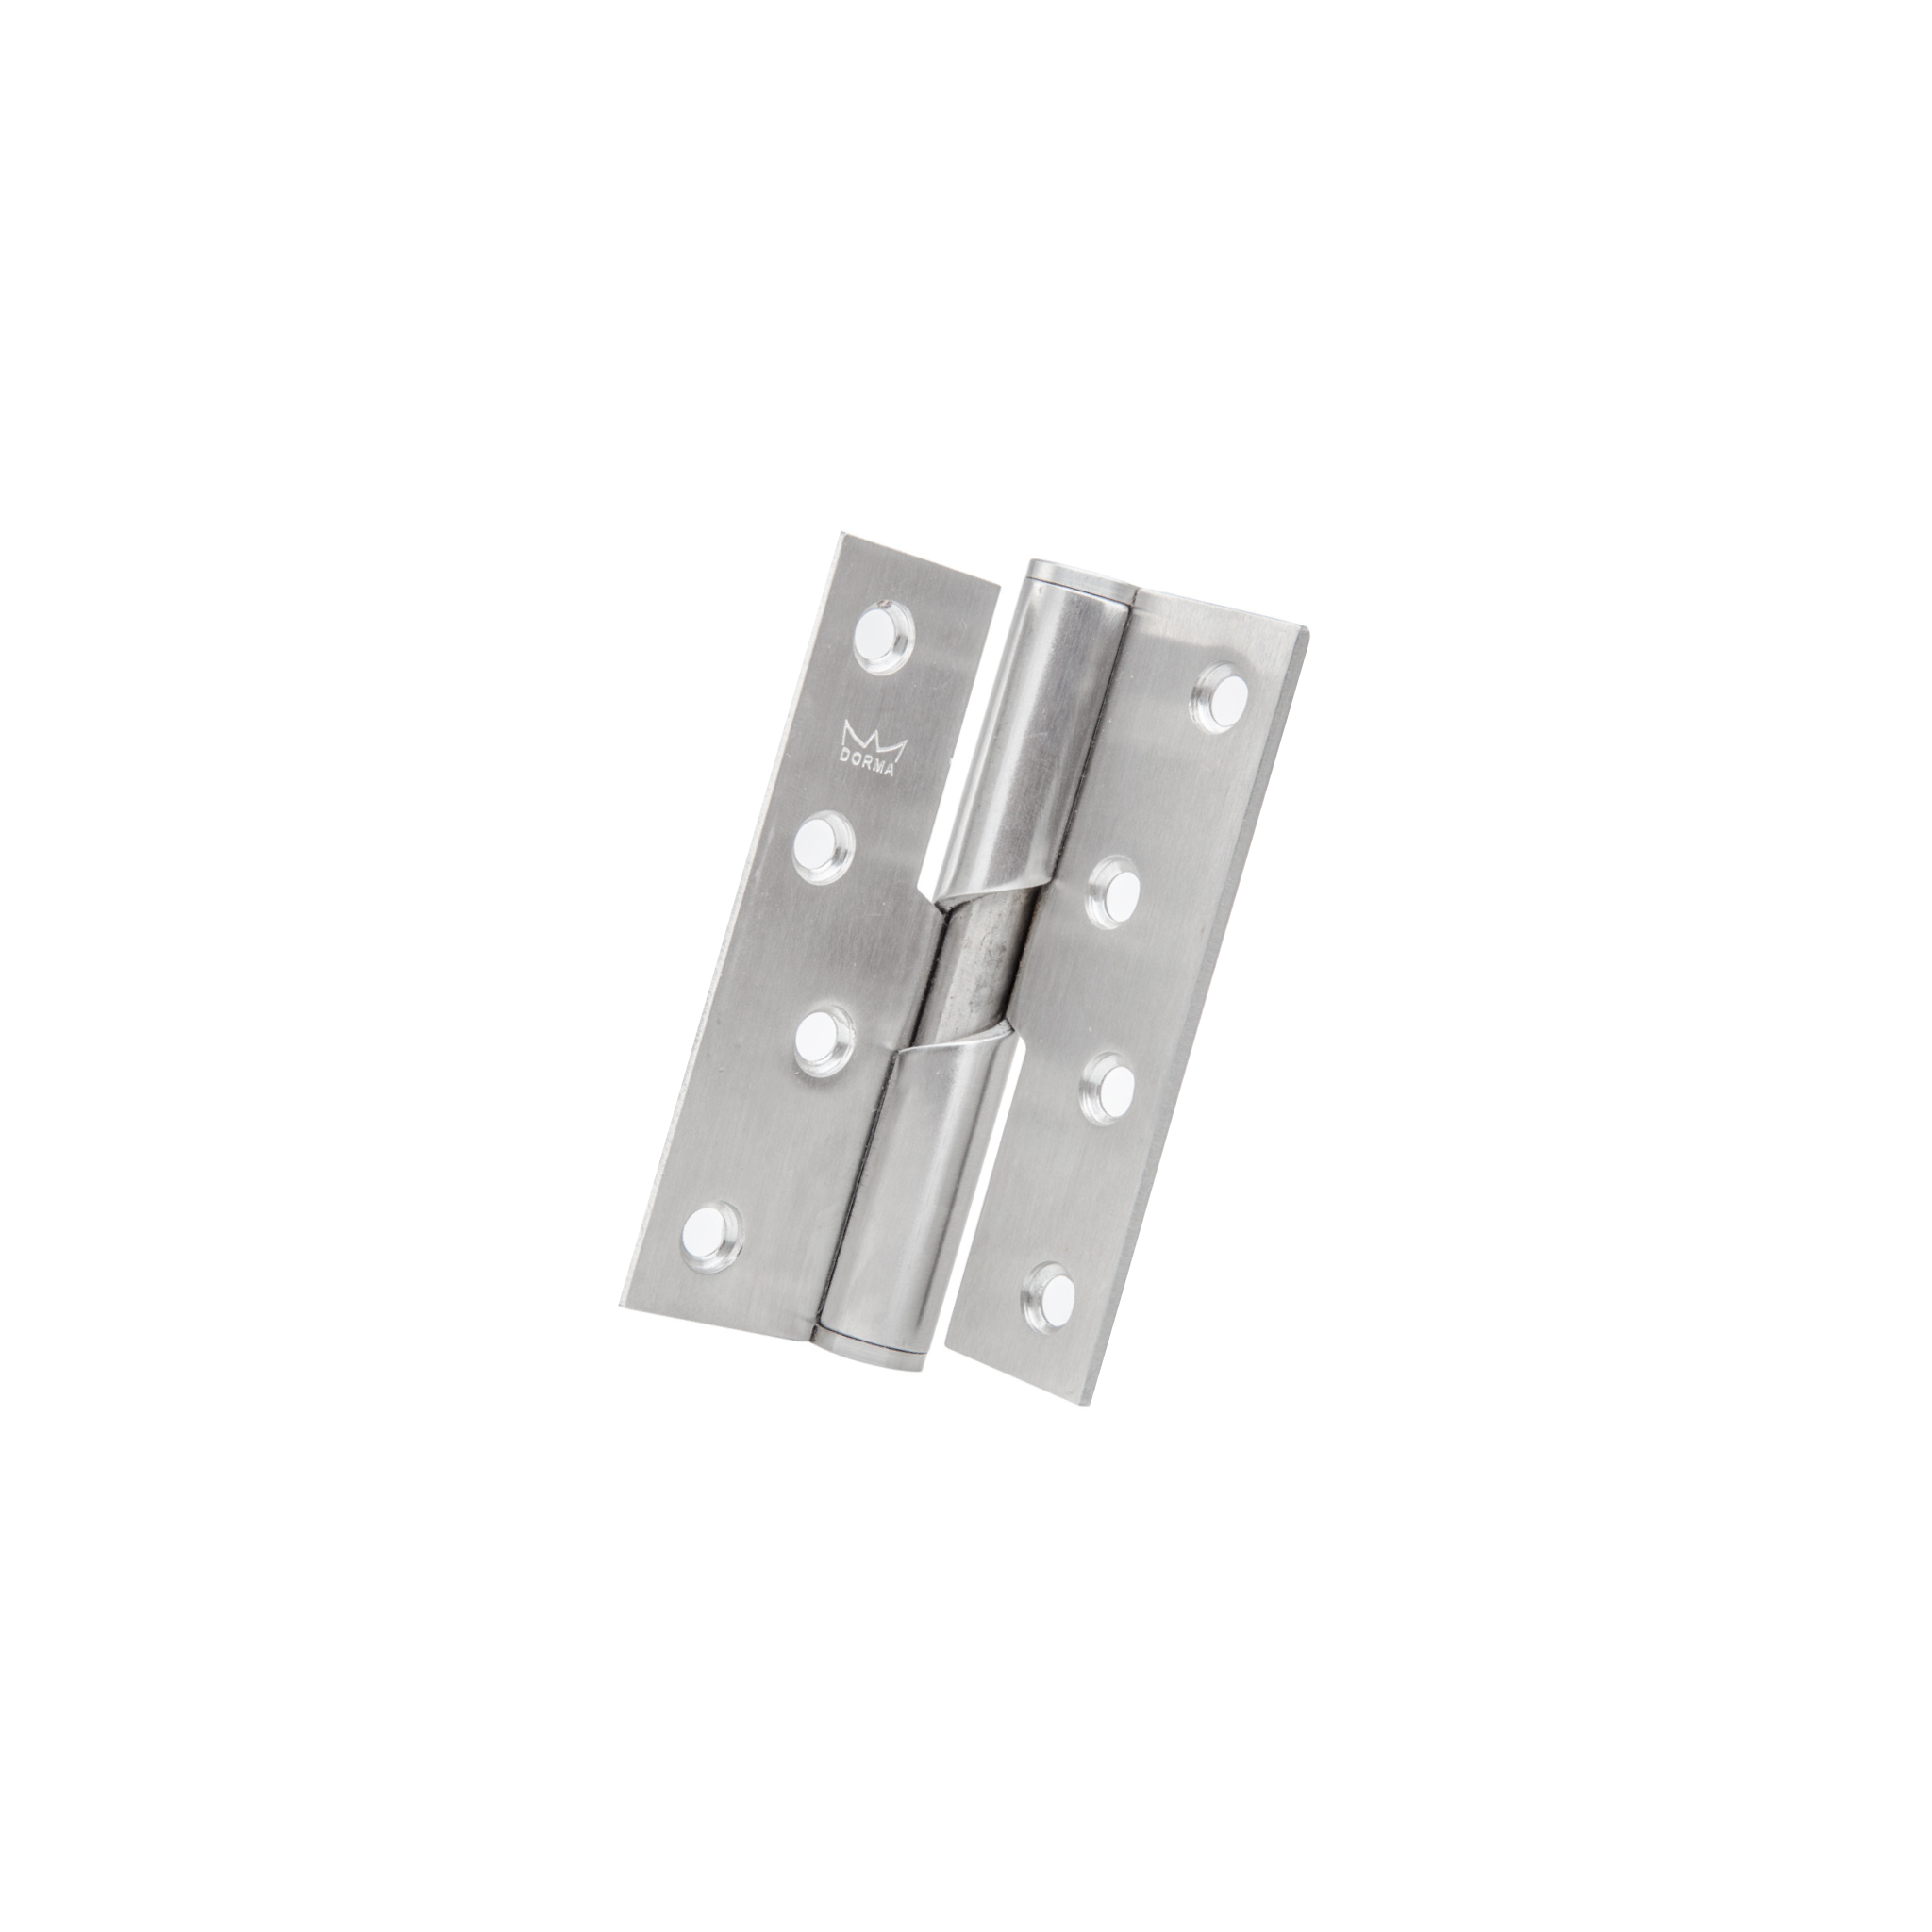 DRL-SS-013 (L), Rising Butt Hinge, Left Hand, 2 x Hinges (1 Pair), Max Door Weight: 50kg, 102mm (h) x 75mm (w) x 3mm (t), Stainless Steel, DORMAKABA